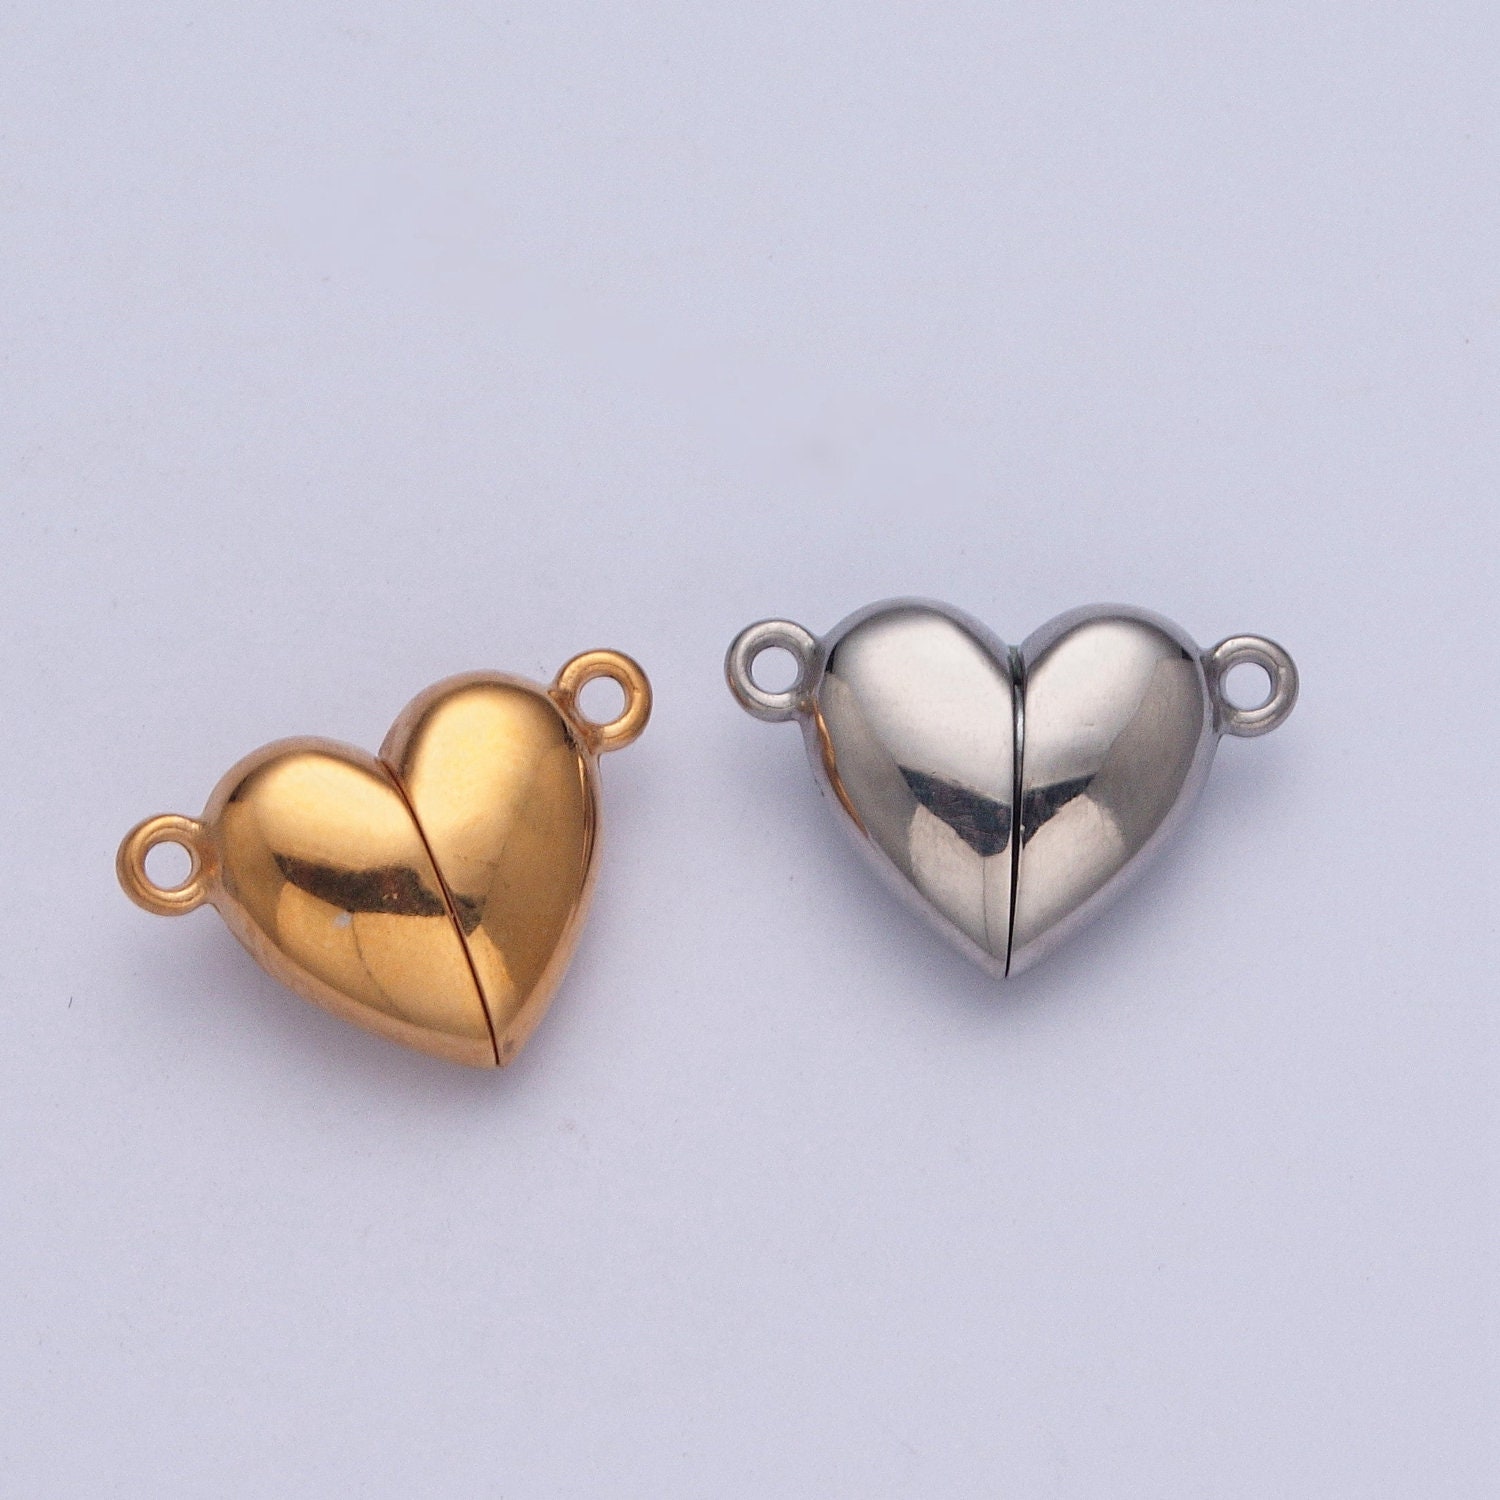 OOKWE 13 Set Heart-Shaped Magnet Jewelry Clasp Jewelry Magnet